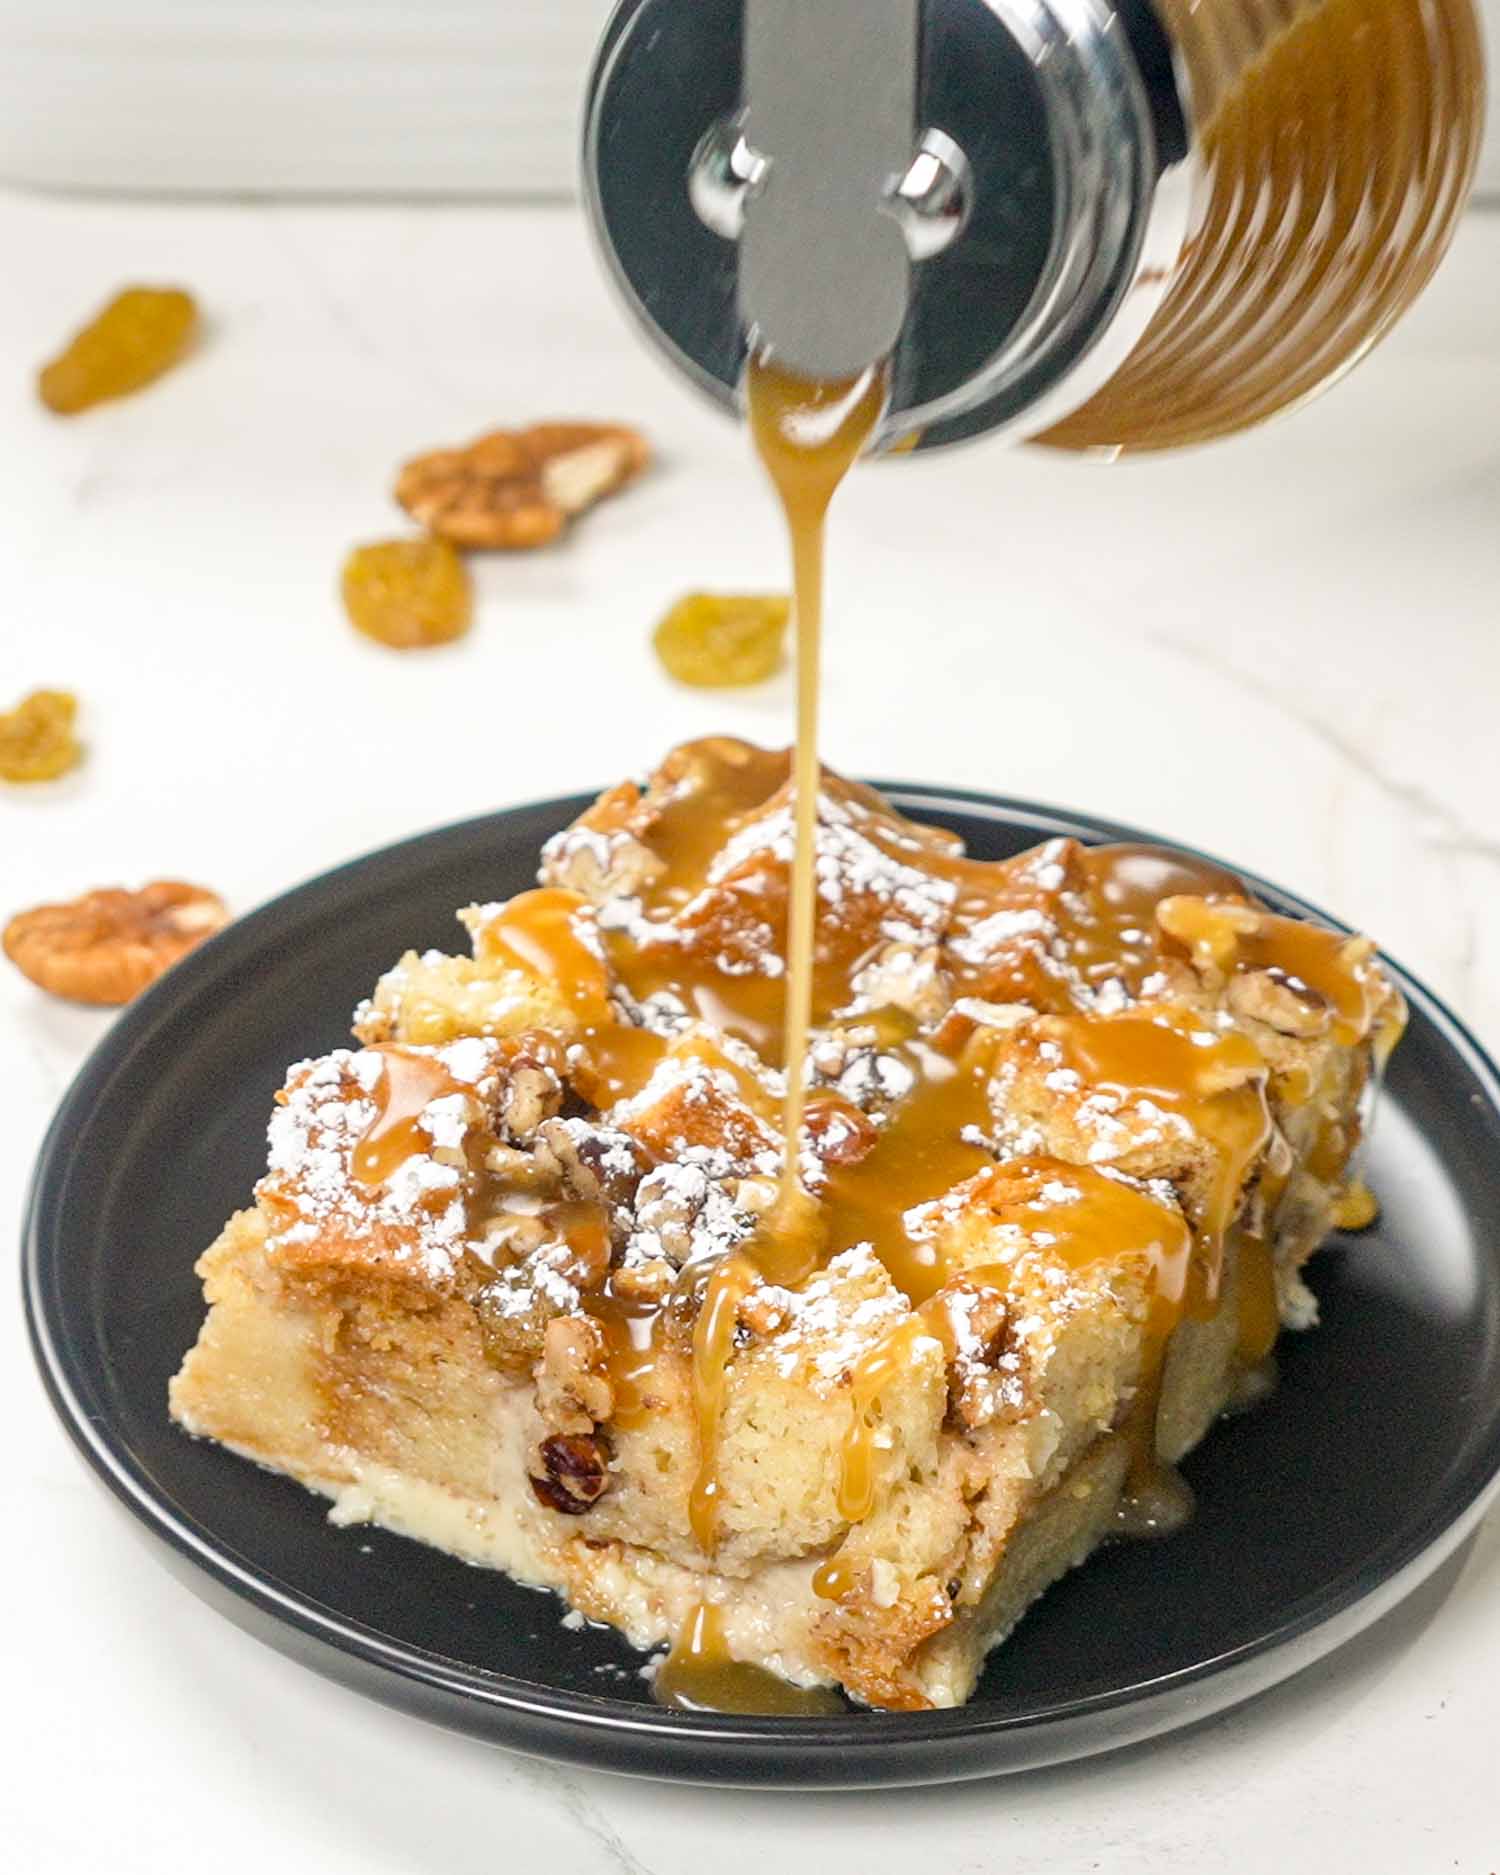 pouring caramel sauce over a slice of bread pudding.